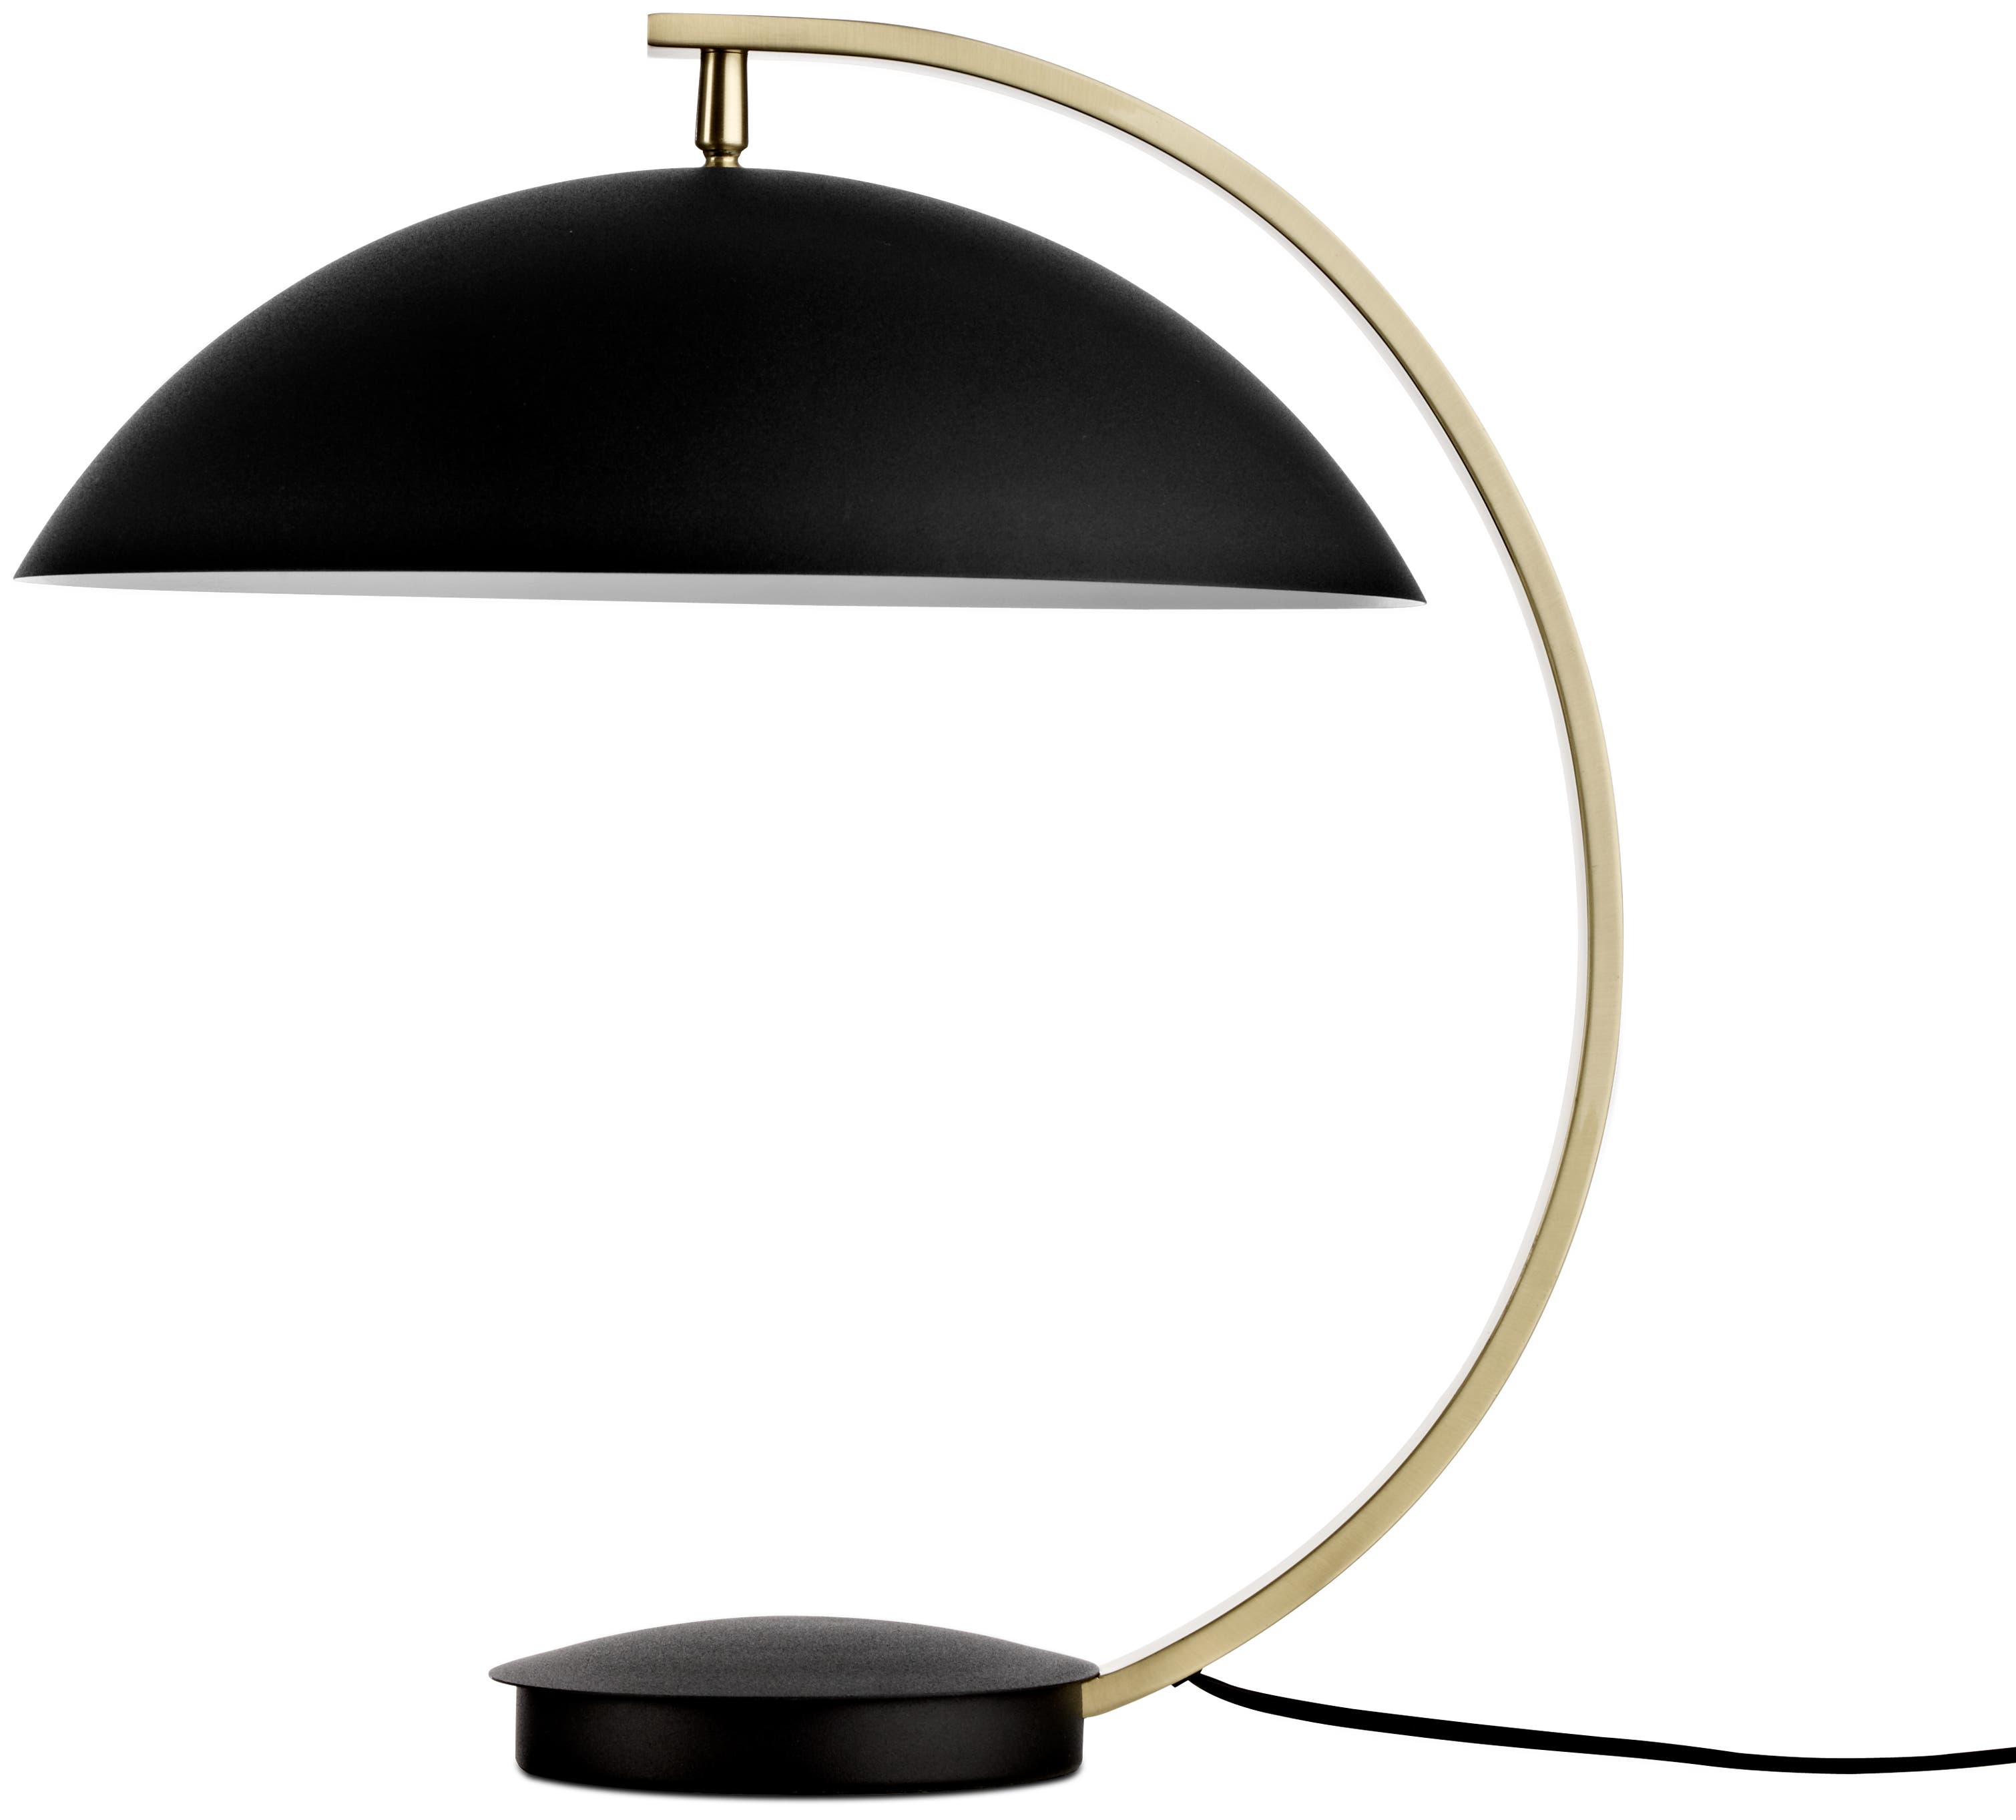 Designer Lamps | Pendant, Floor, Table and Wall Lamps | BoConcept